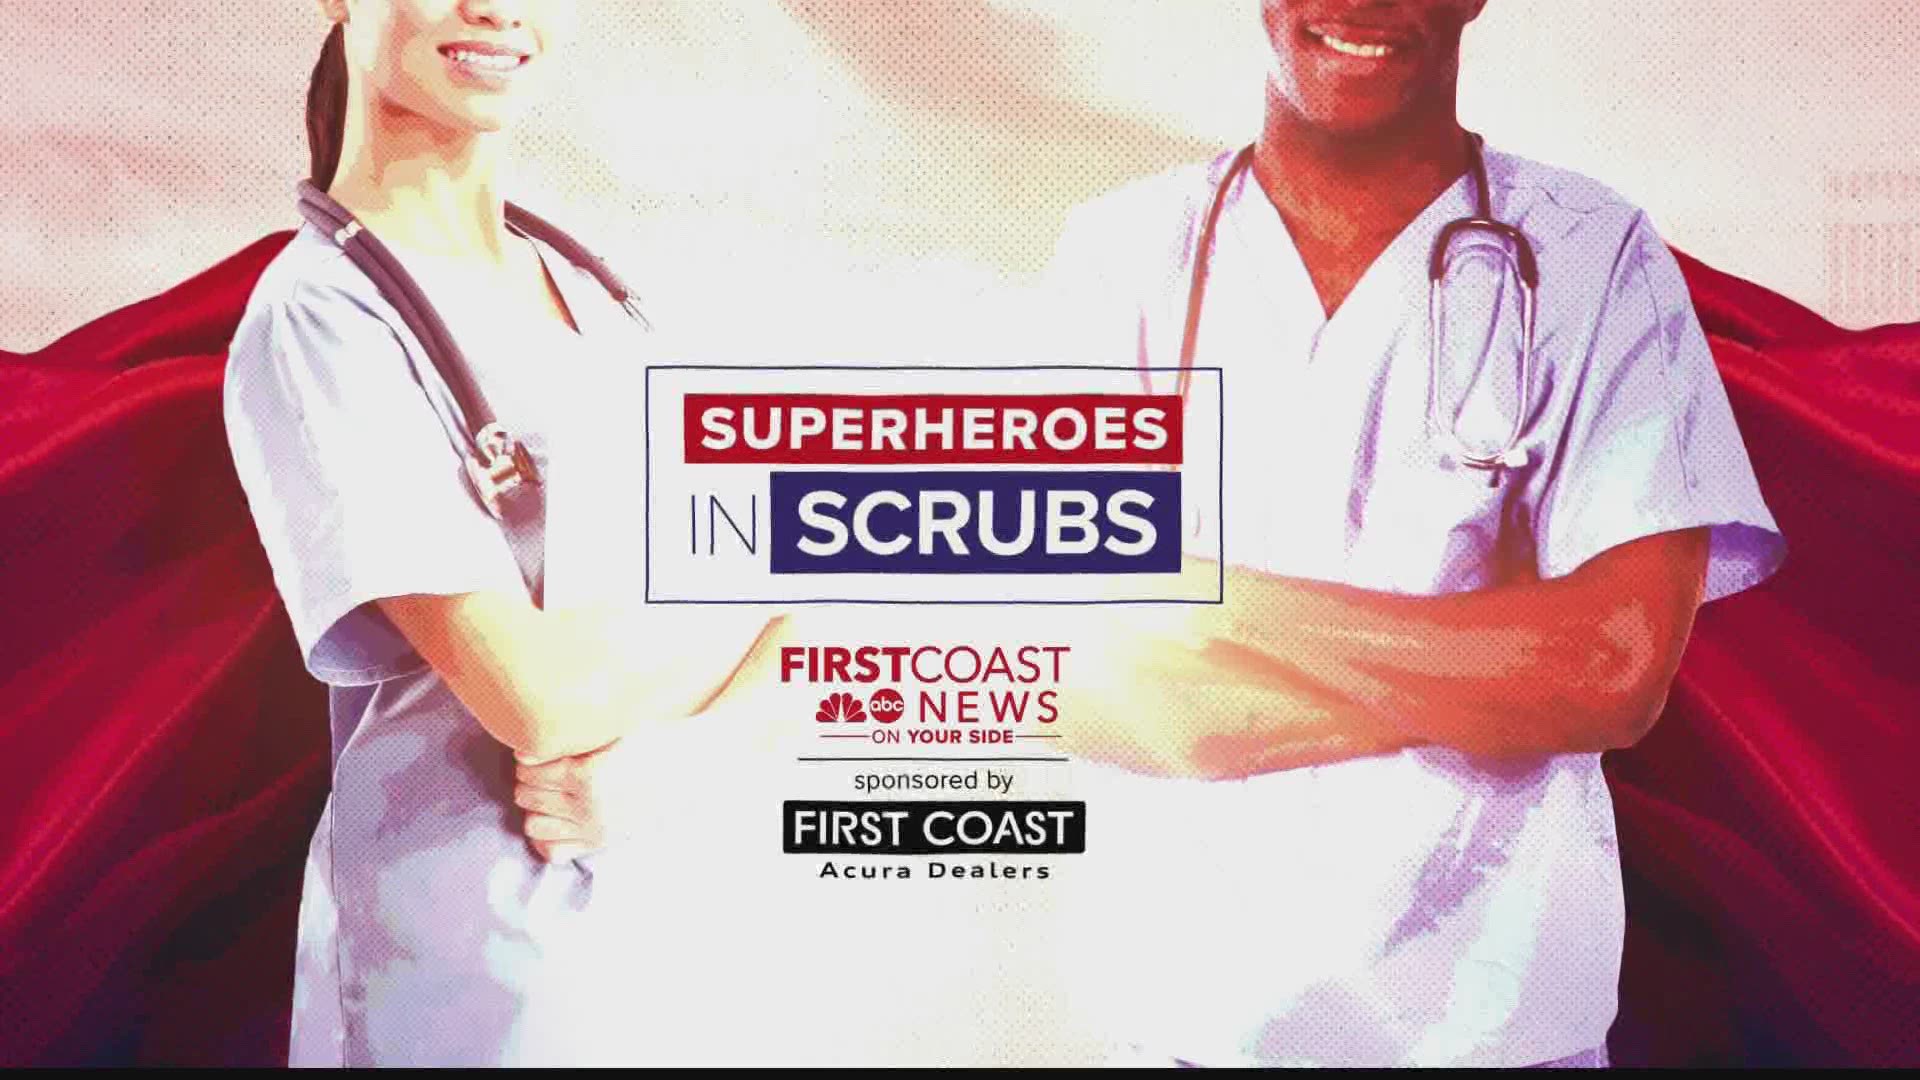 Help us celebrate and salute the superheroes working to keep us safe.